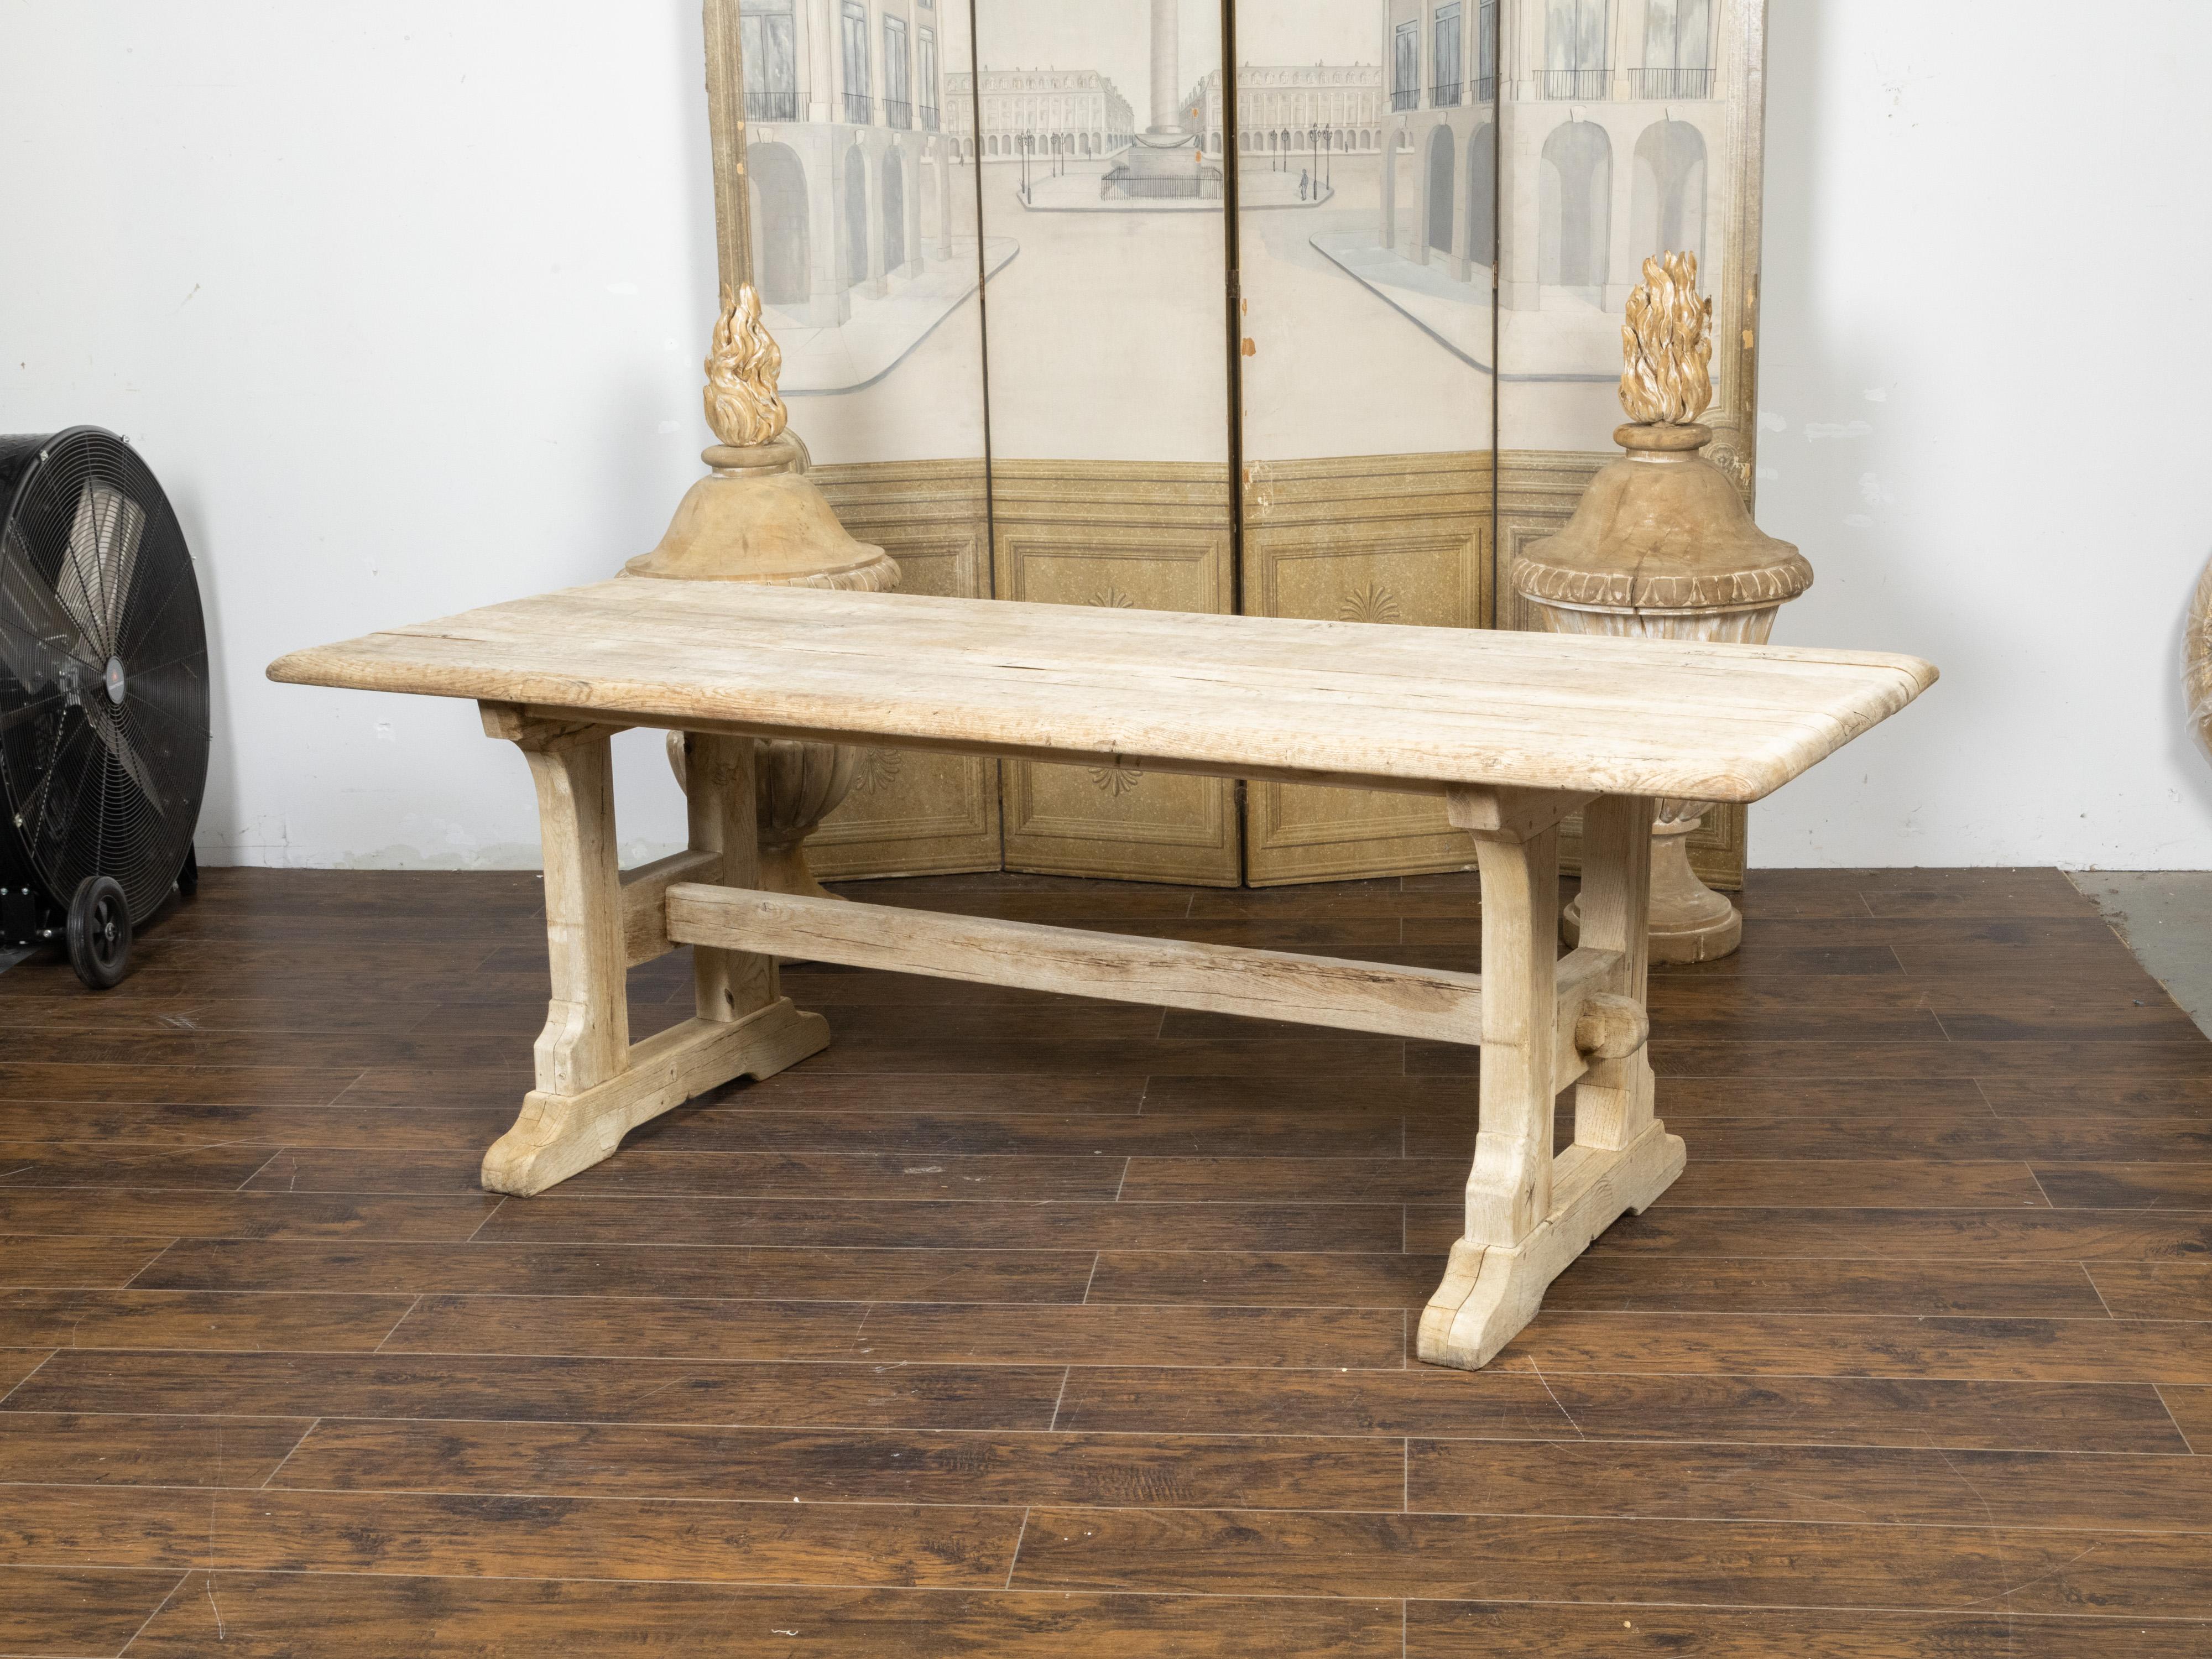 Rustic English 19th Century Natural Wood Farm Table with Trestle Base For Sale 3